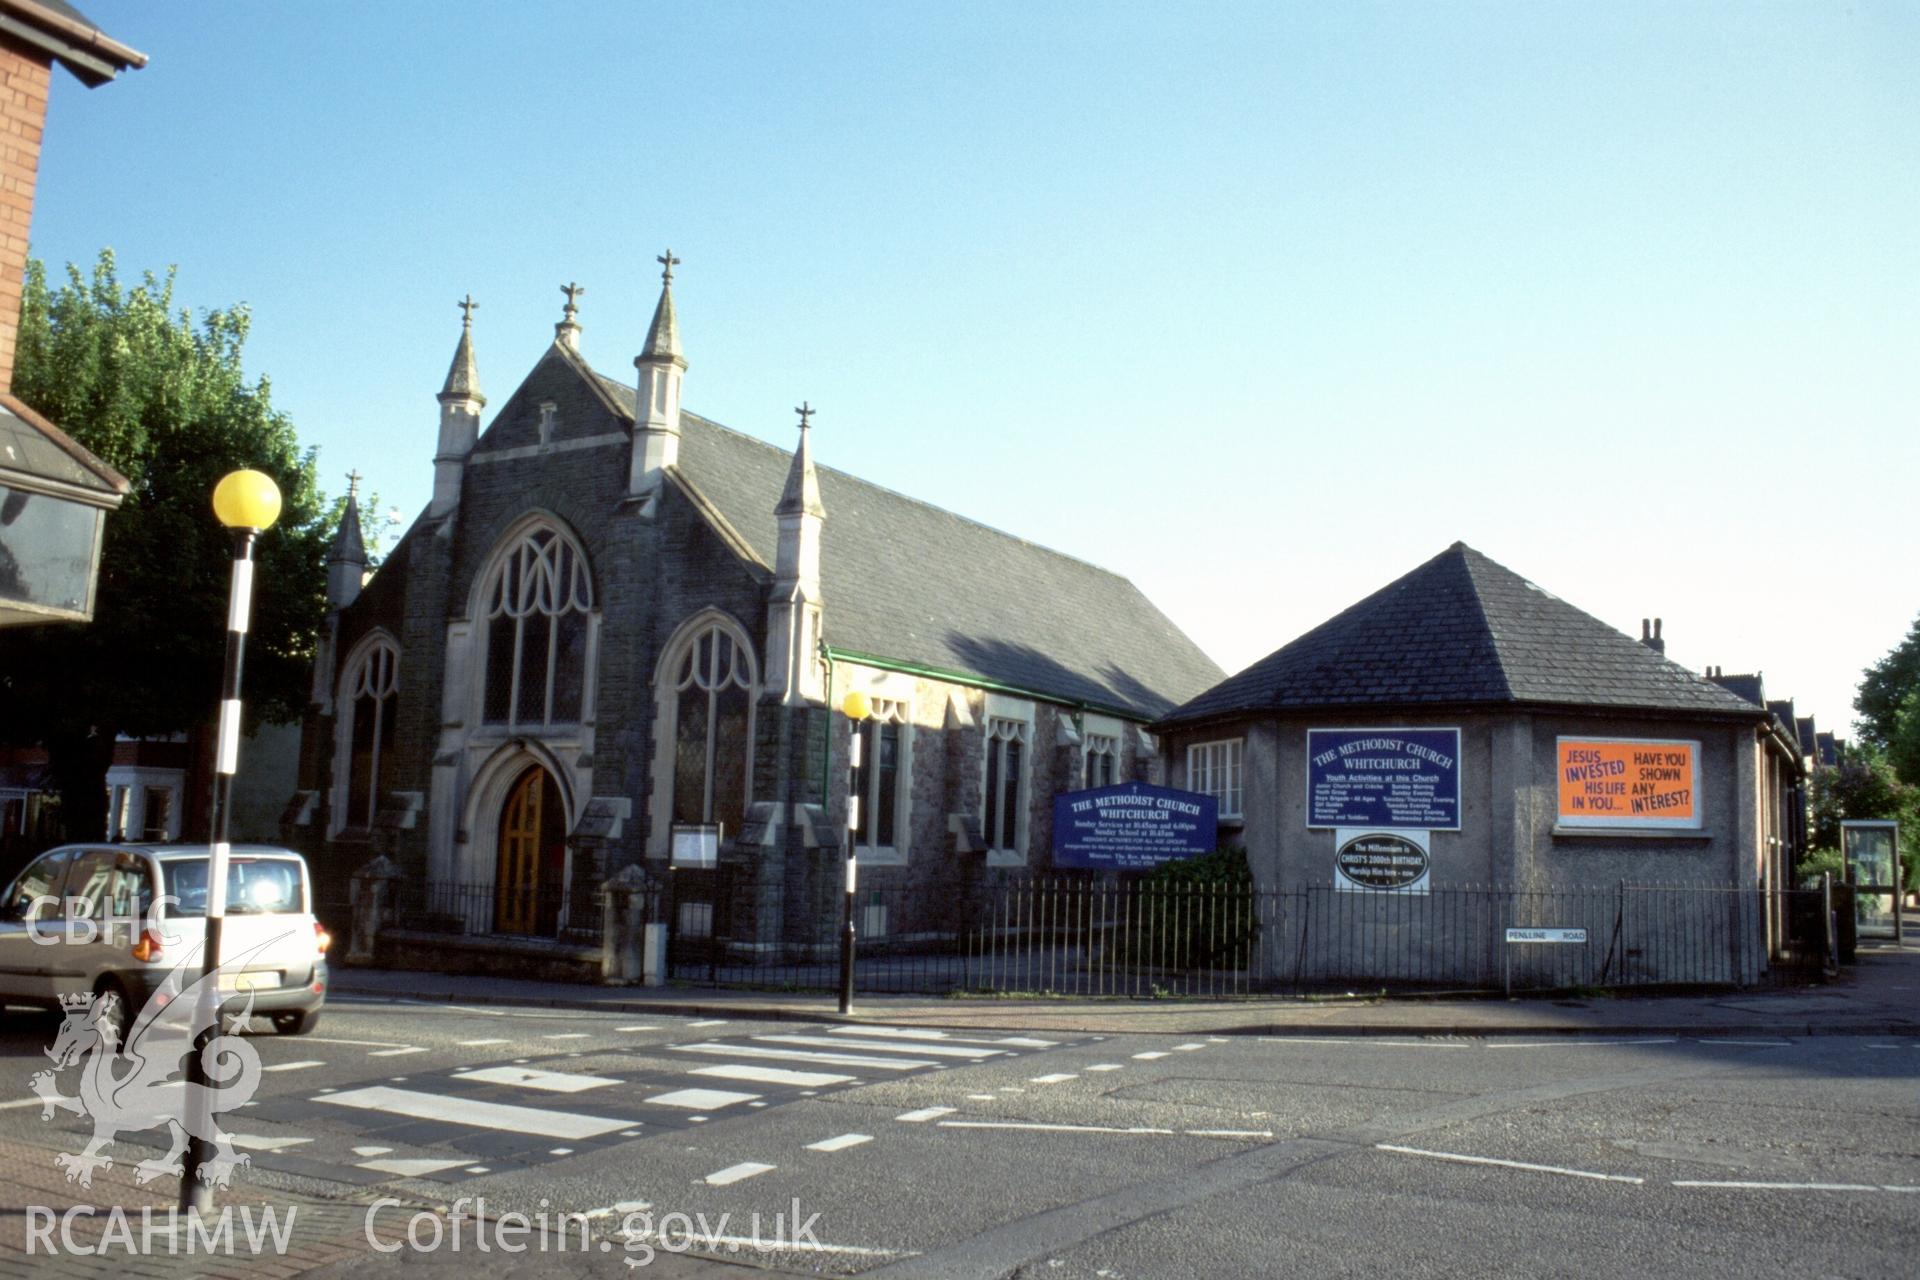 Photographic survey of Eglwys Newydd Wesleyan Methodist Chapel (whitchurch), Whitchurch; Eglwys Newydd, Yr, consisting of 1 colour transparencies, produced by Olwen Jenkins, 10/05/2003.